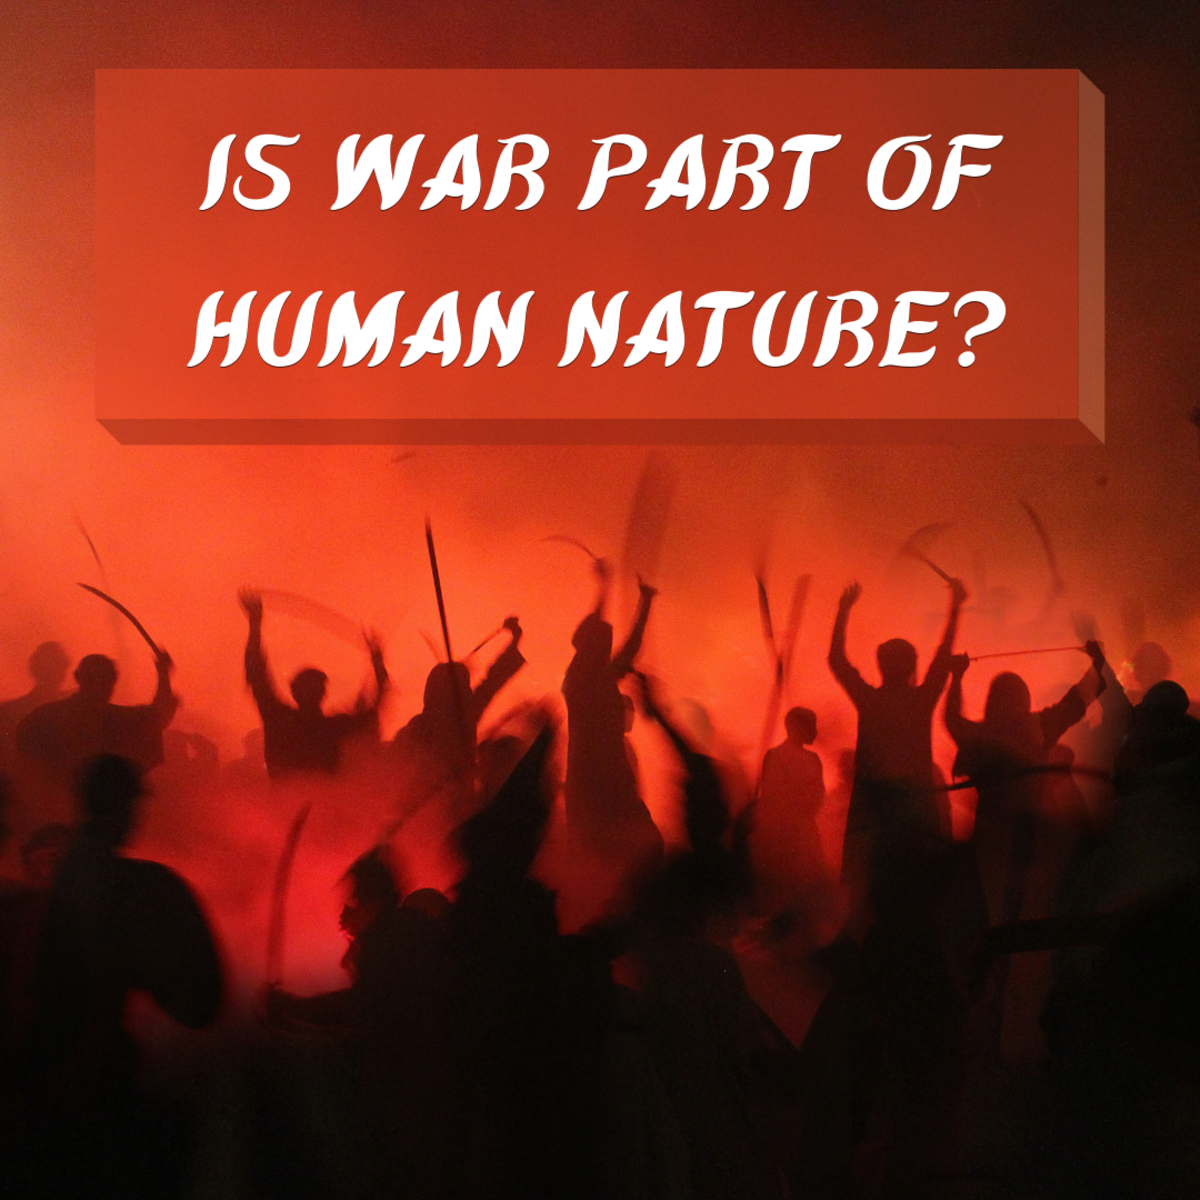 Is War Part of Human Nature?